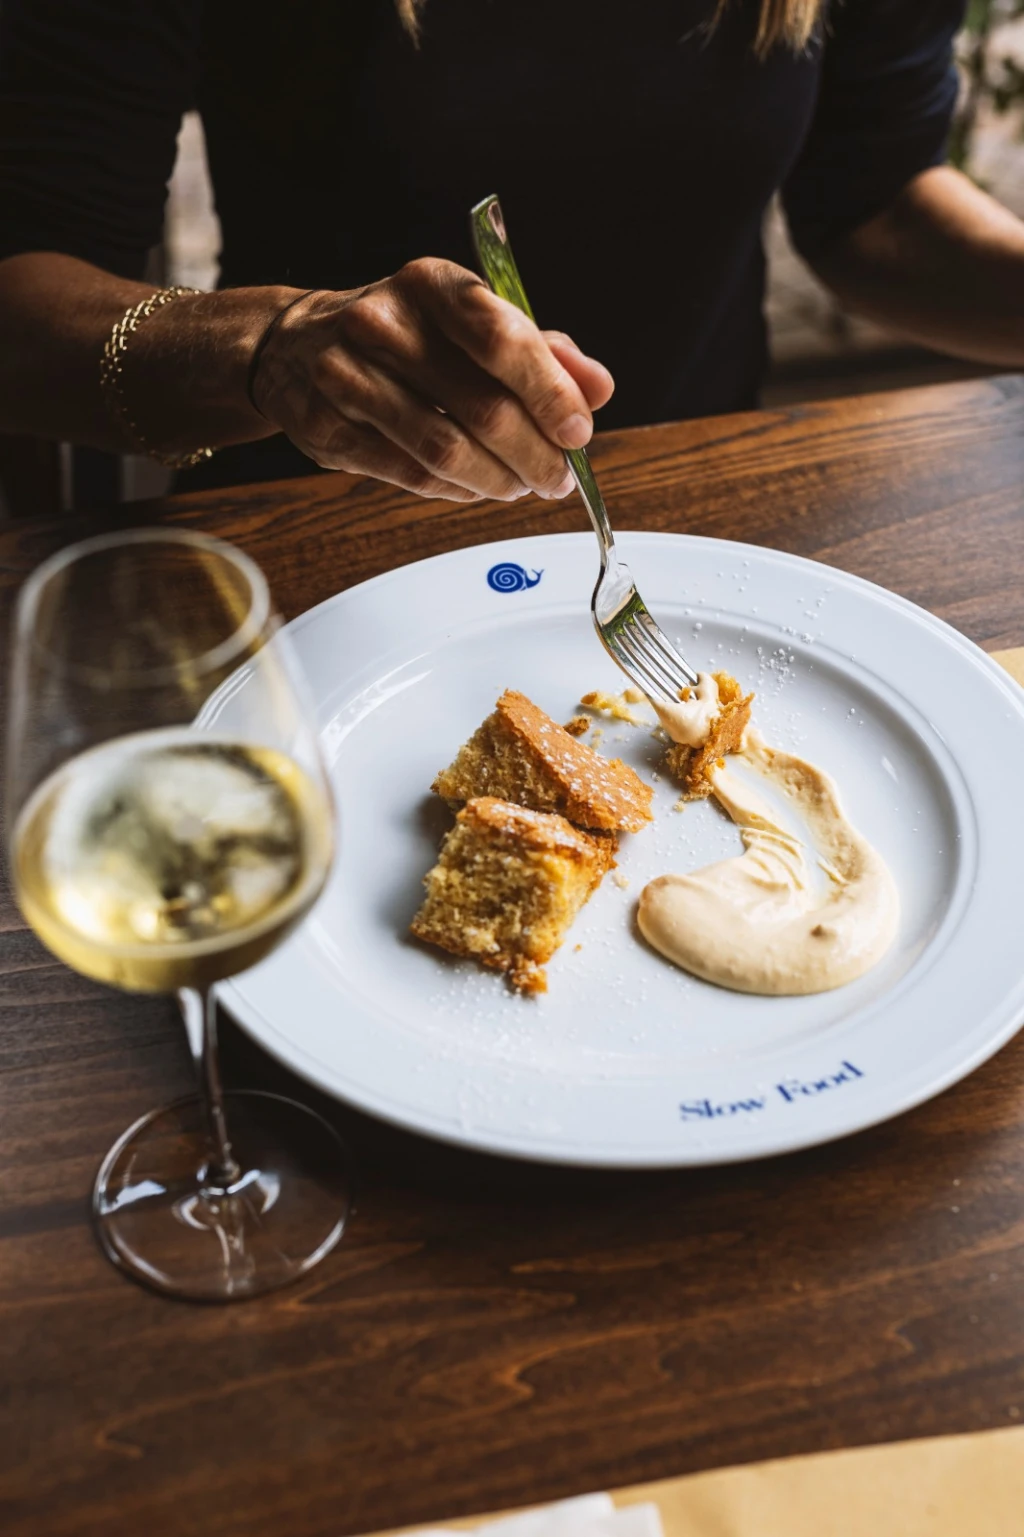 In essence, slow food restaurants are about savoring the dining experience, supporting local ecosystems and economies, and preserving culinary traditions. Photo by Valeria Bismar